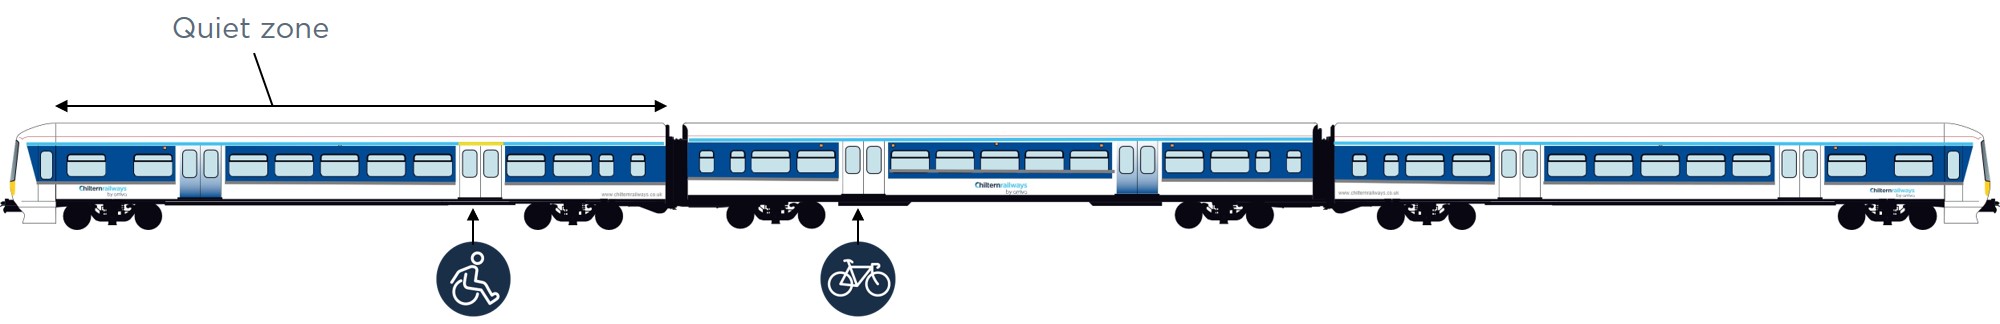 diagram showing a 3 car formation of our 165 trains. The disabled access point is at the front of the train and bike entrance in the middle carriage.